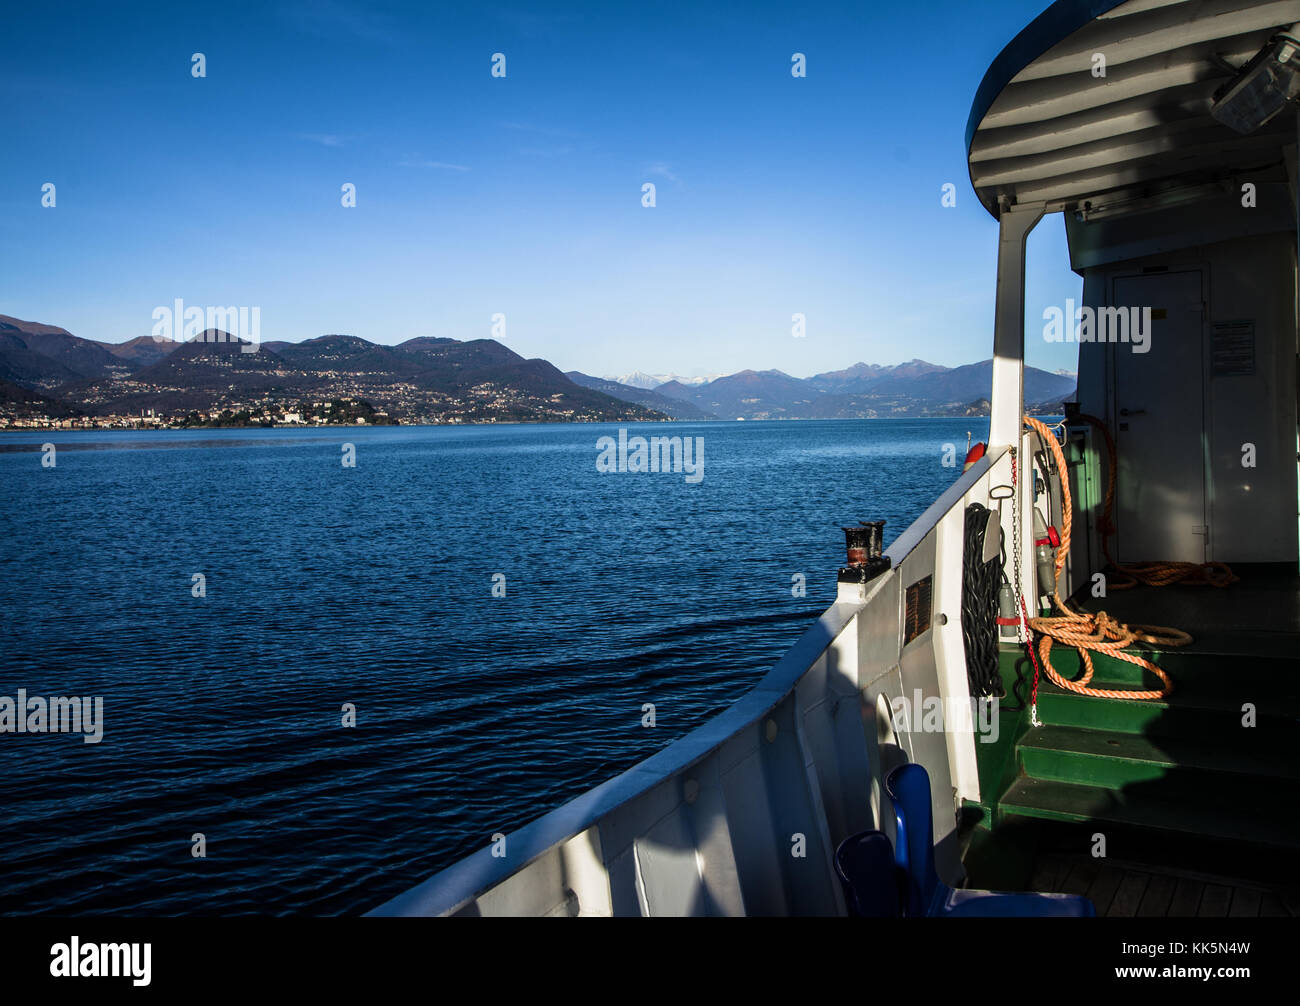 admiring the winter landscape during a cruise on Lake Maggiore, Italy Stock Photo